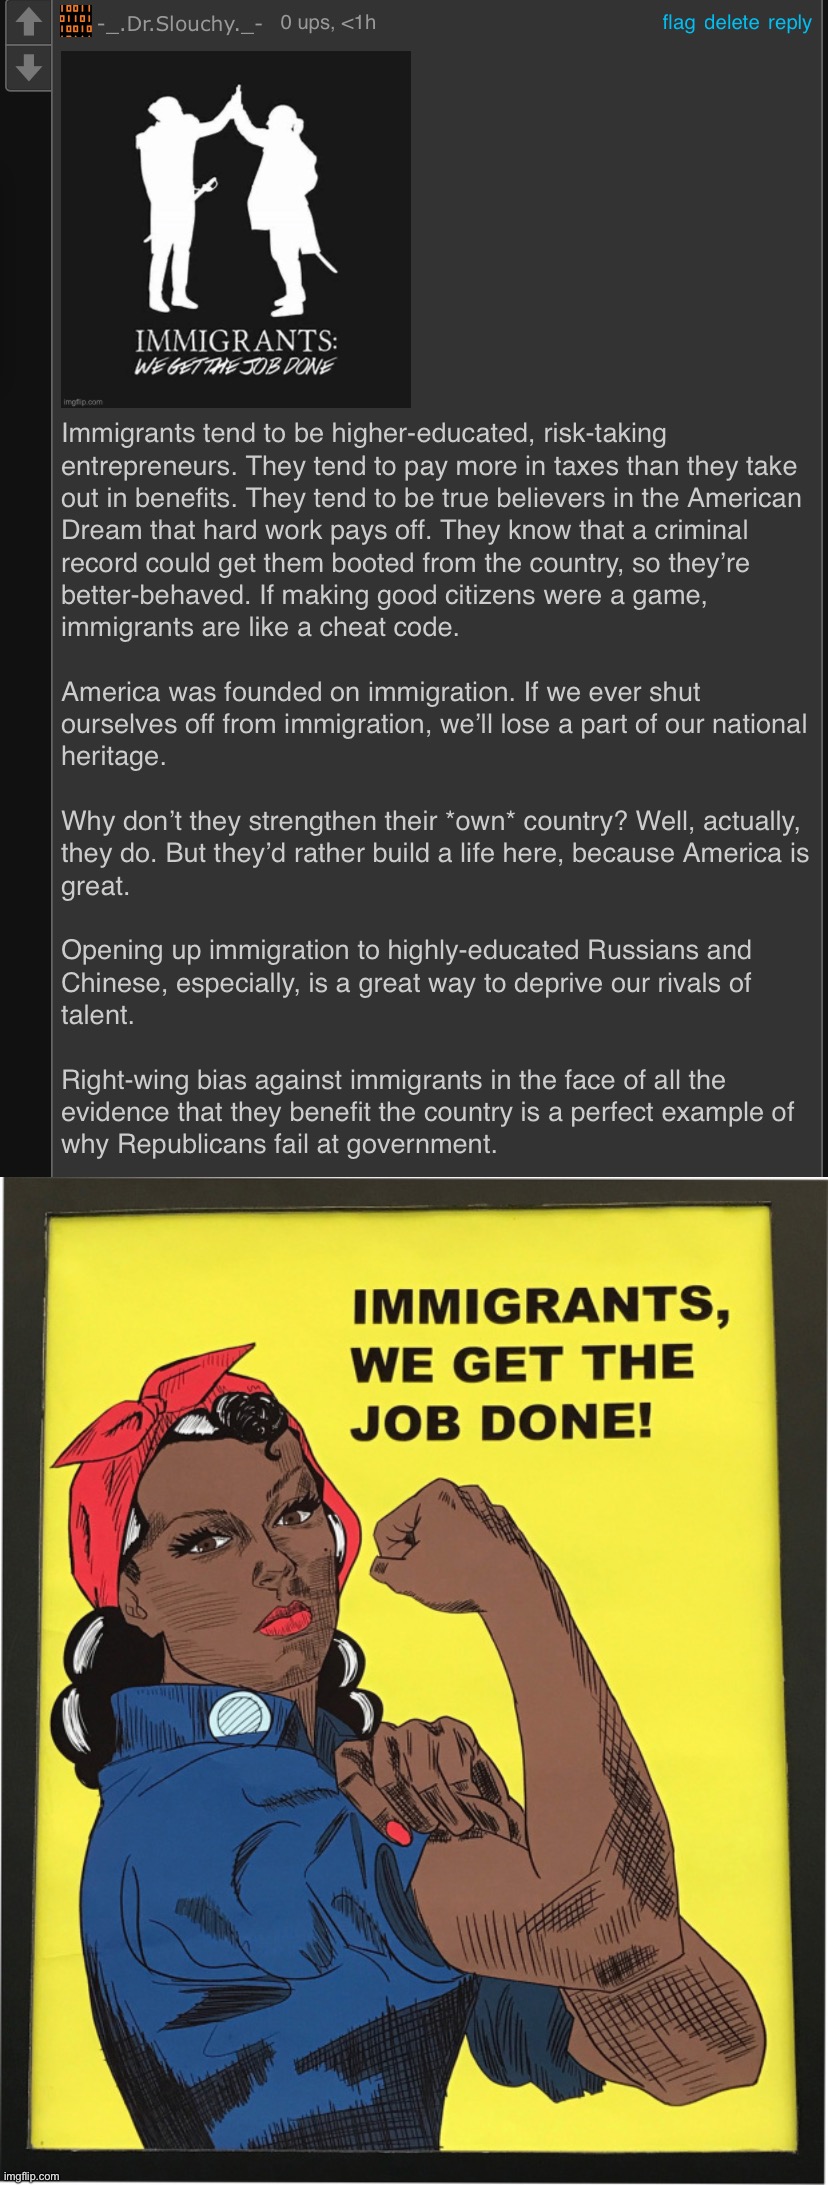 Let’s hear it for immigrants. | image tagged in dr slouchy immigrants get the job done,immigrants we get the job done,immigration,immigrants,immigrant,america | made w/ Imgflip meme maker